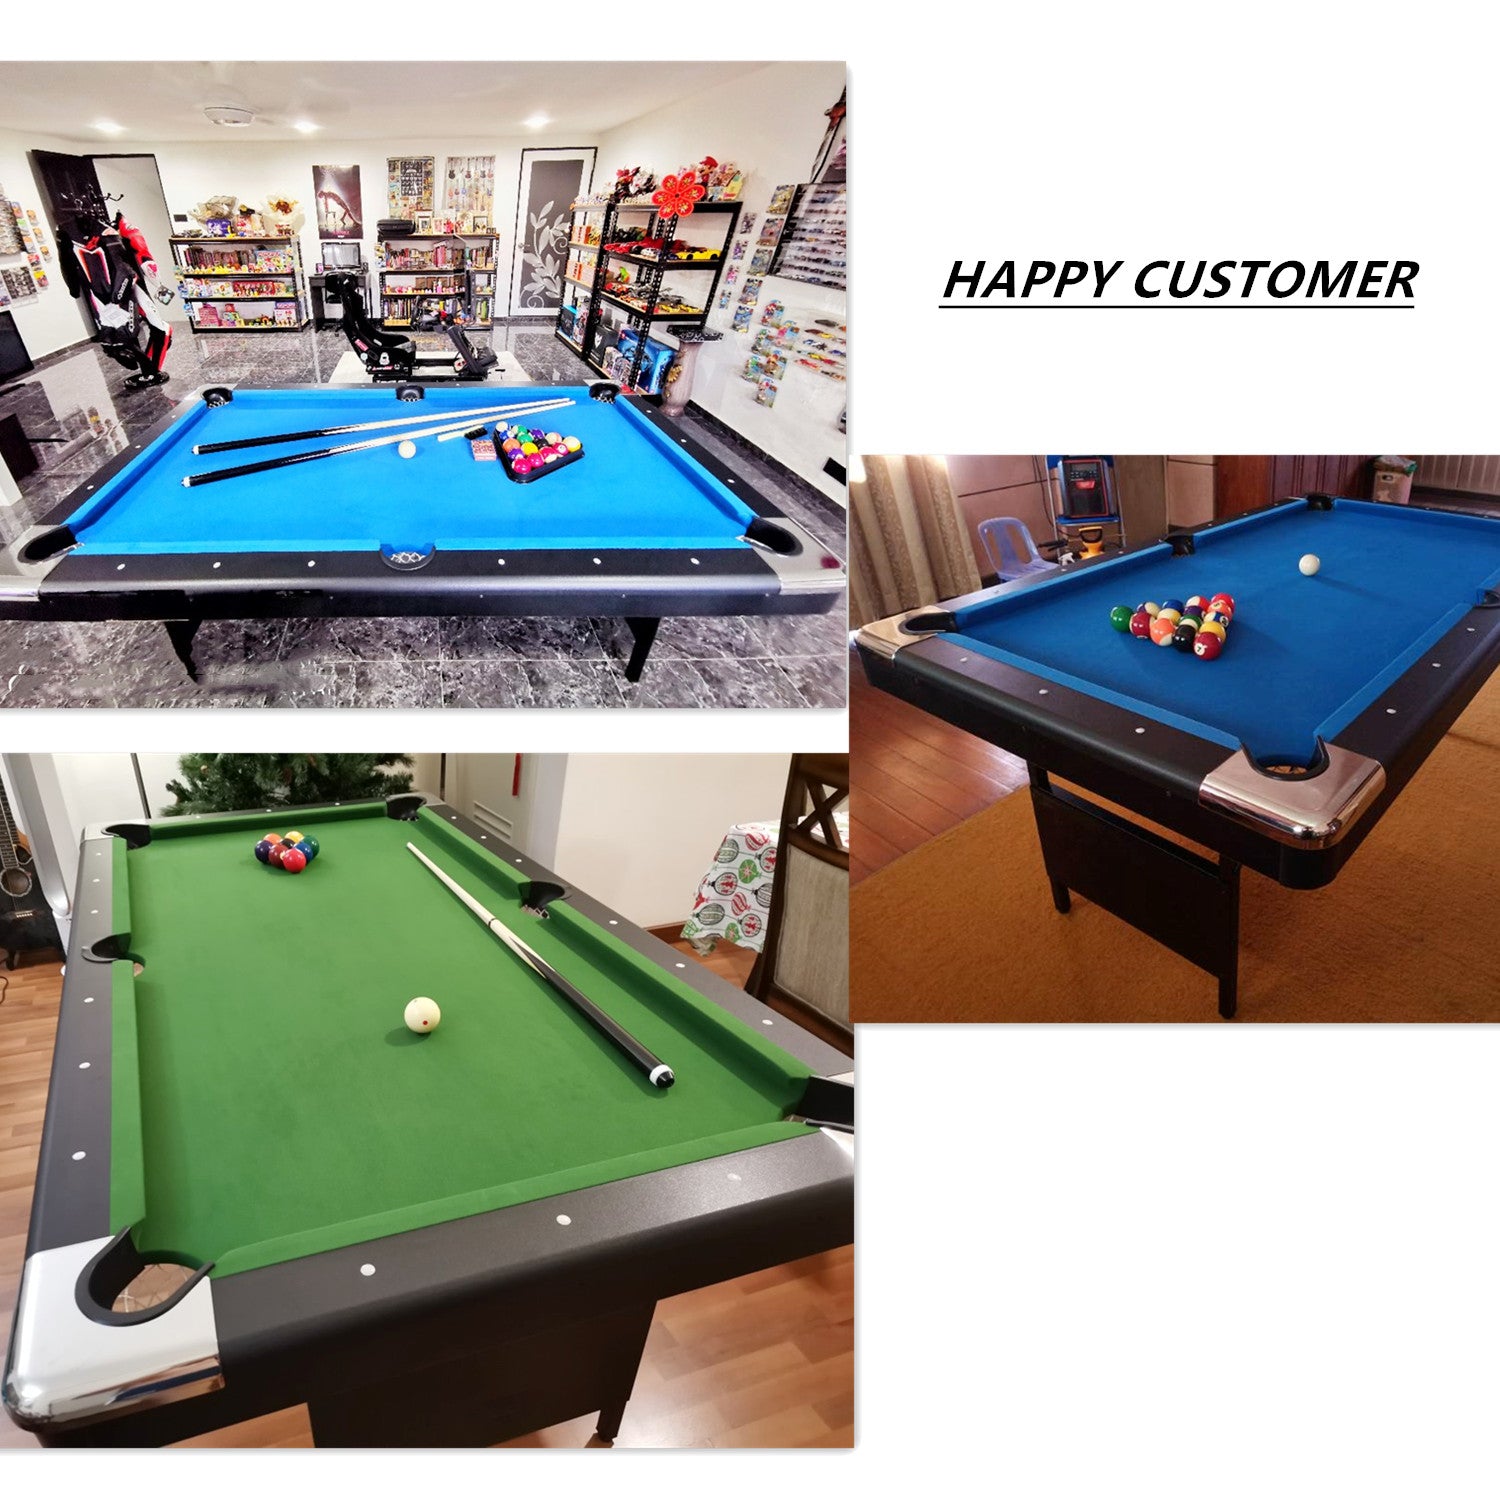 6FT Foldable Pool Table-Andorra|No Assembly Required